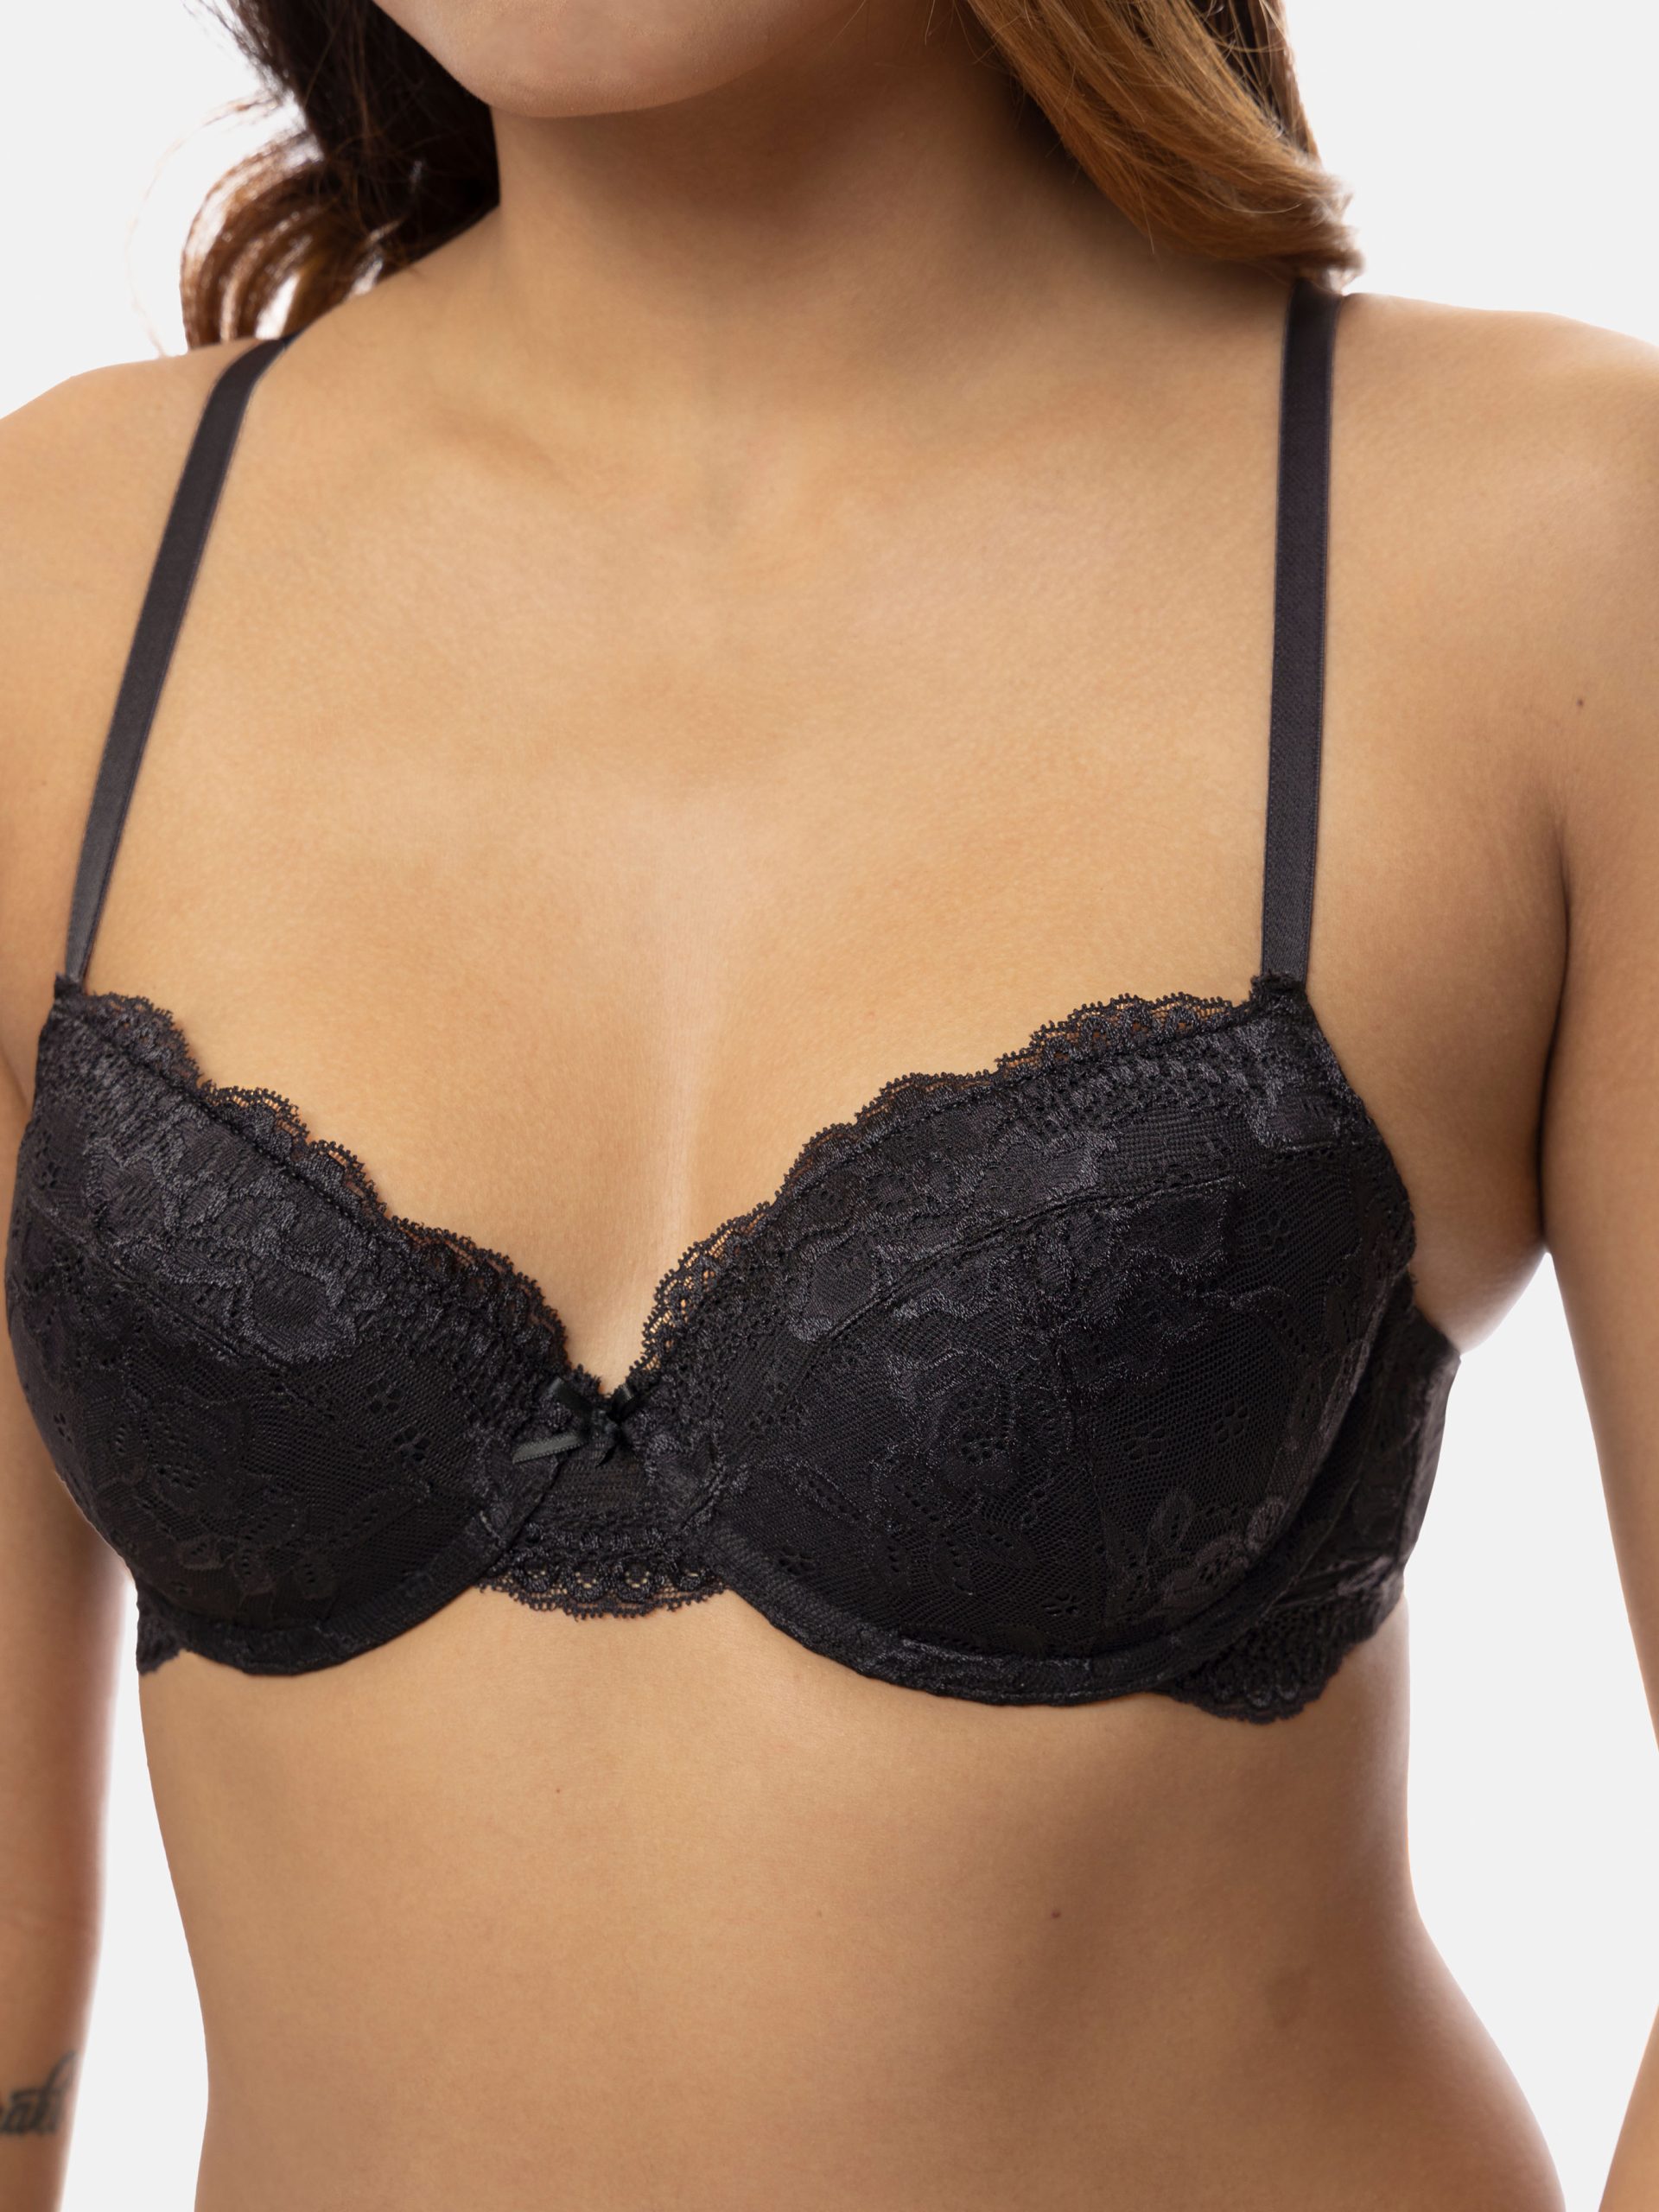 full cup bra, underwired, non padded lianne, dorina. limited edition.